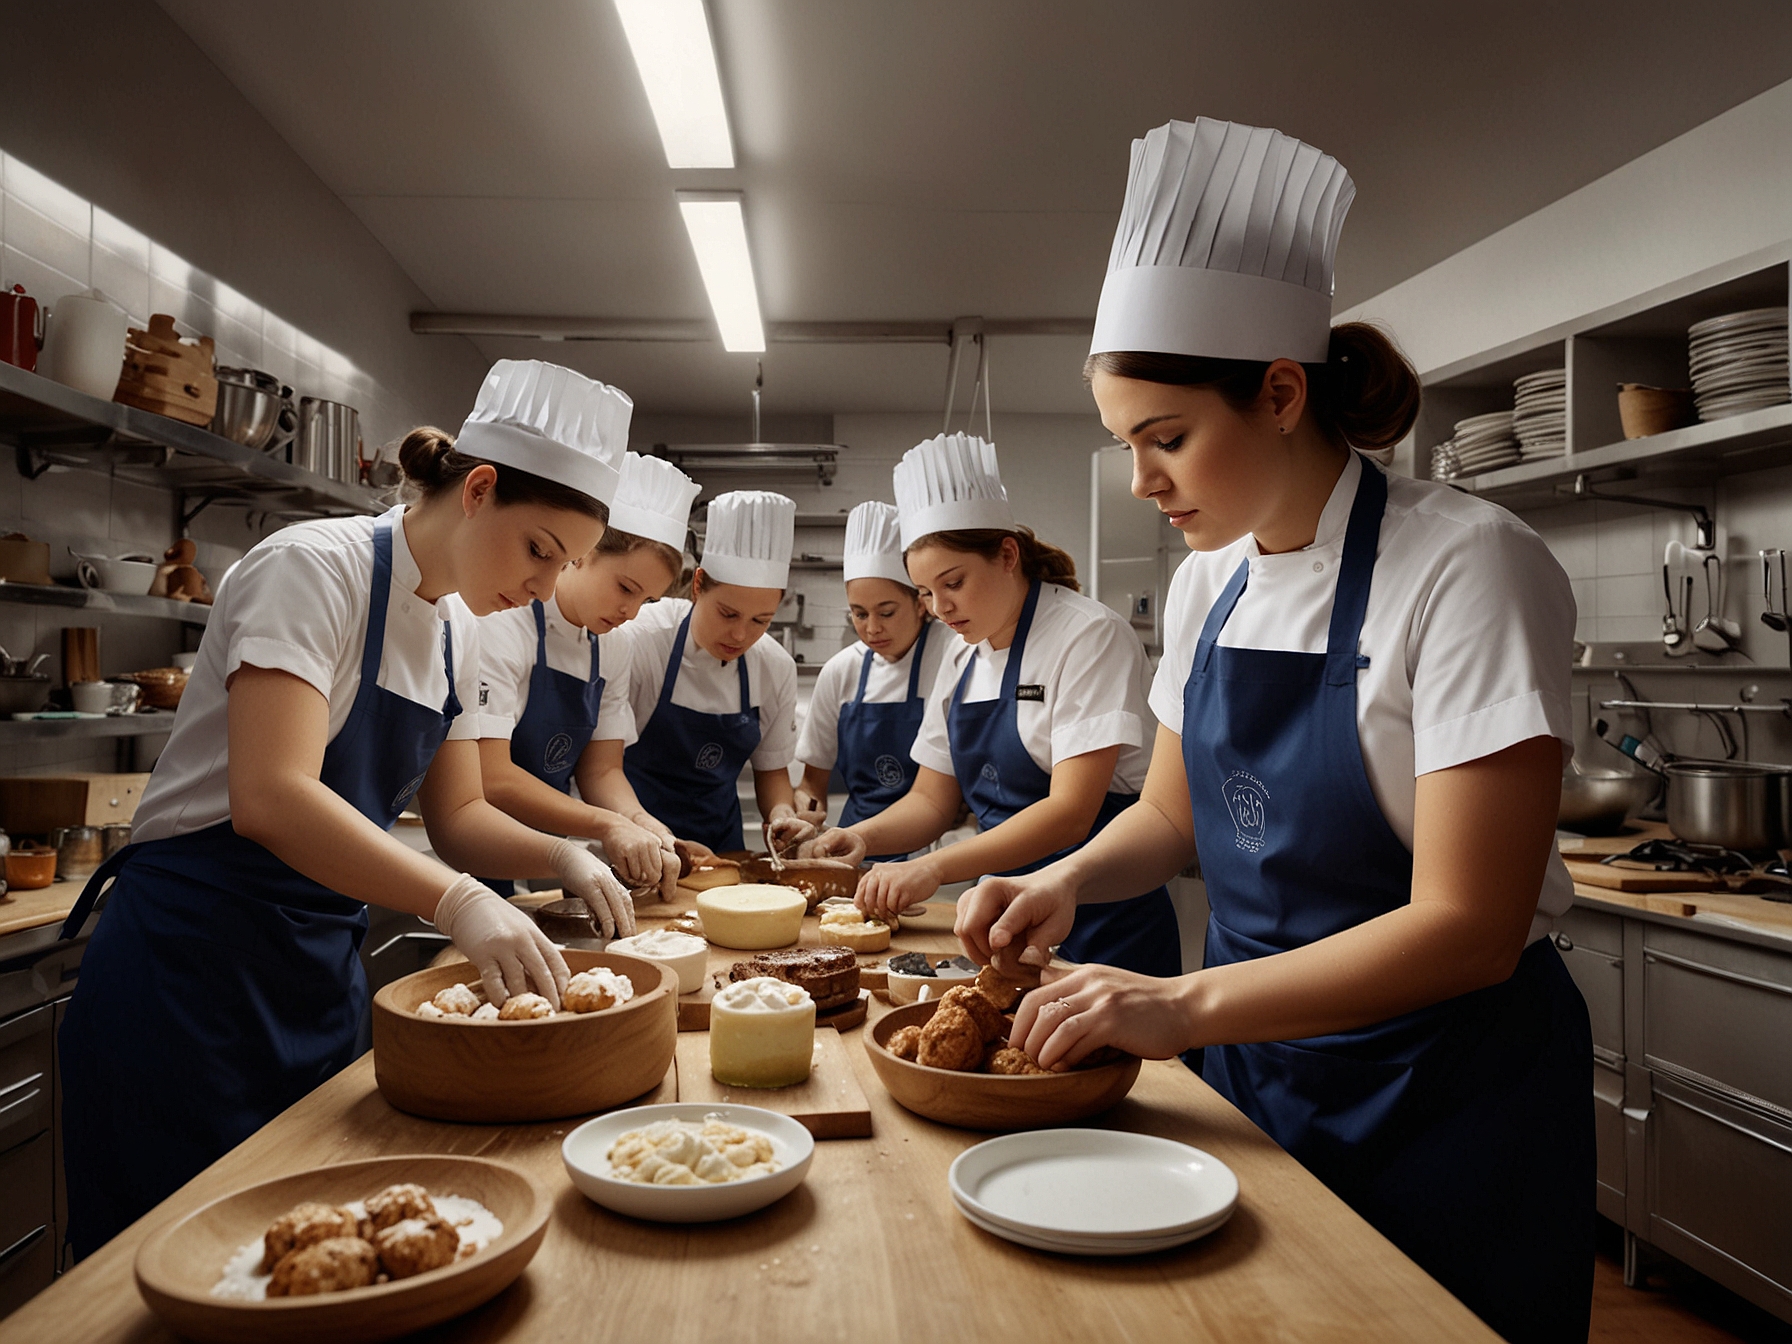 Contestants intensely working in the MasterChef Australia kitchen, surrounded by various ingredients and tools, as they attempt to recreate the complex multi-layered patisserie under tight time constraints.